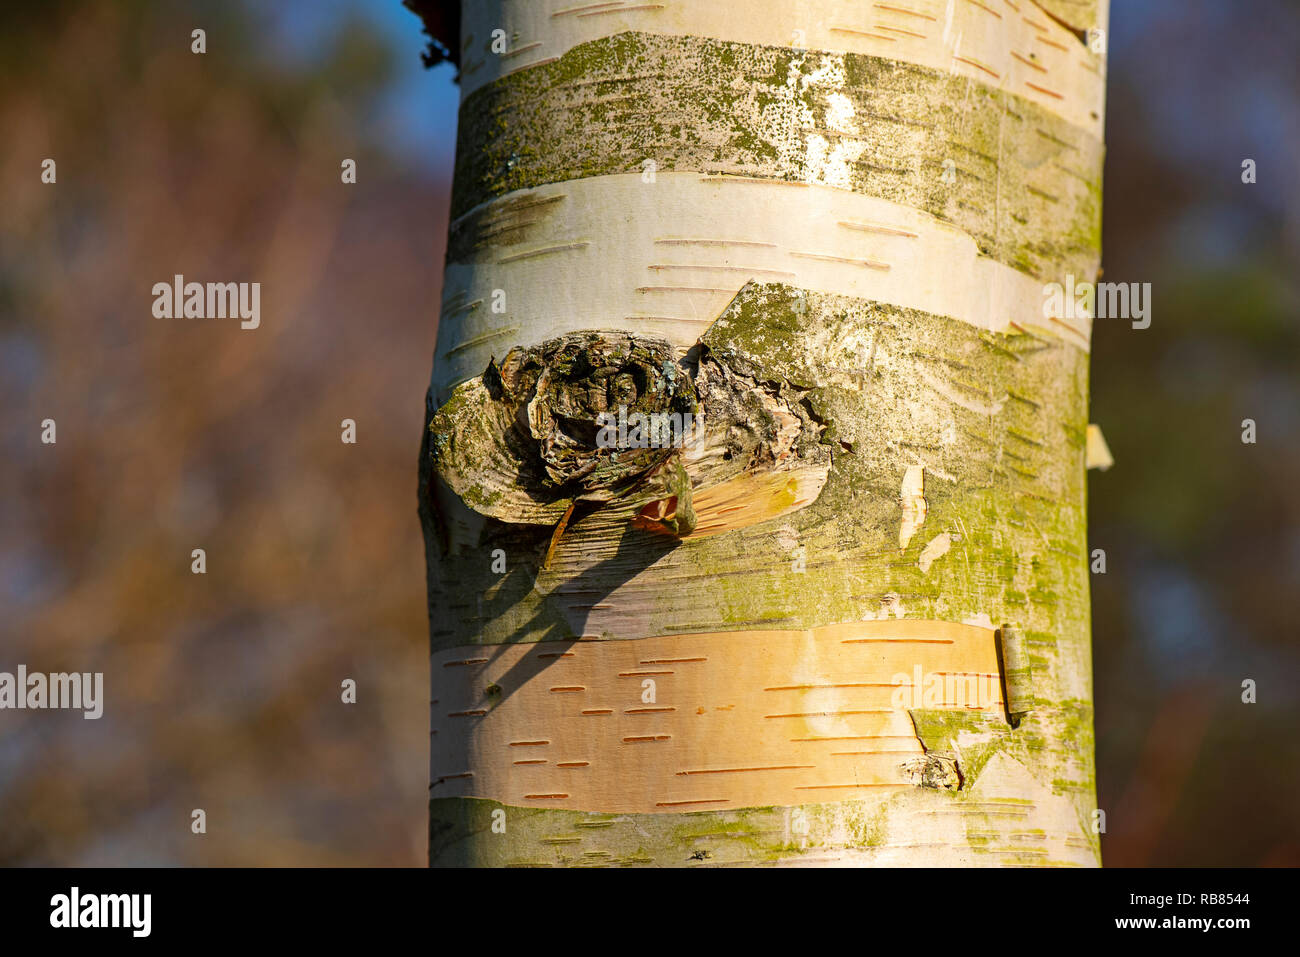 Close-up image of the beautiful Himalayan Birch tree also known as Betula utilis with its stunning white peeling bark Stock Photo